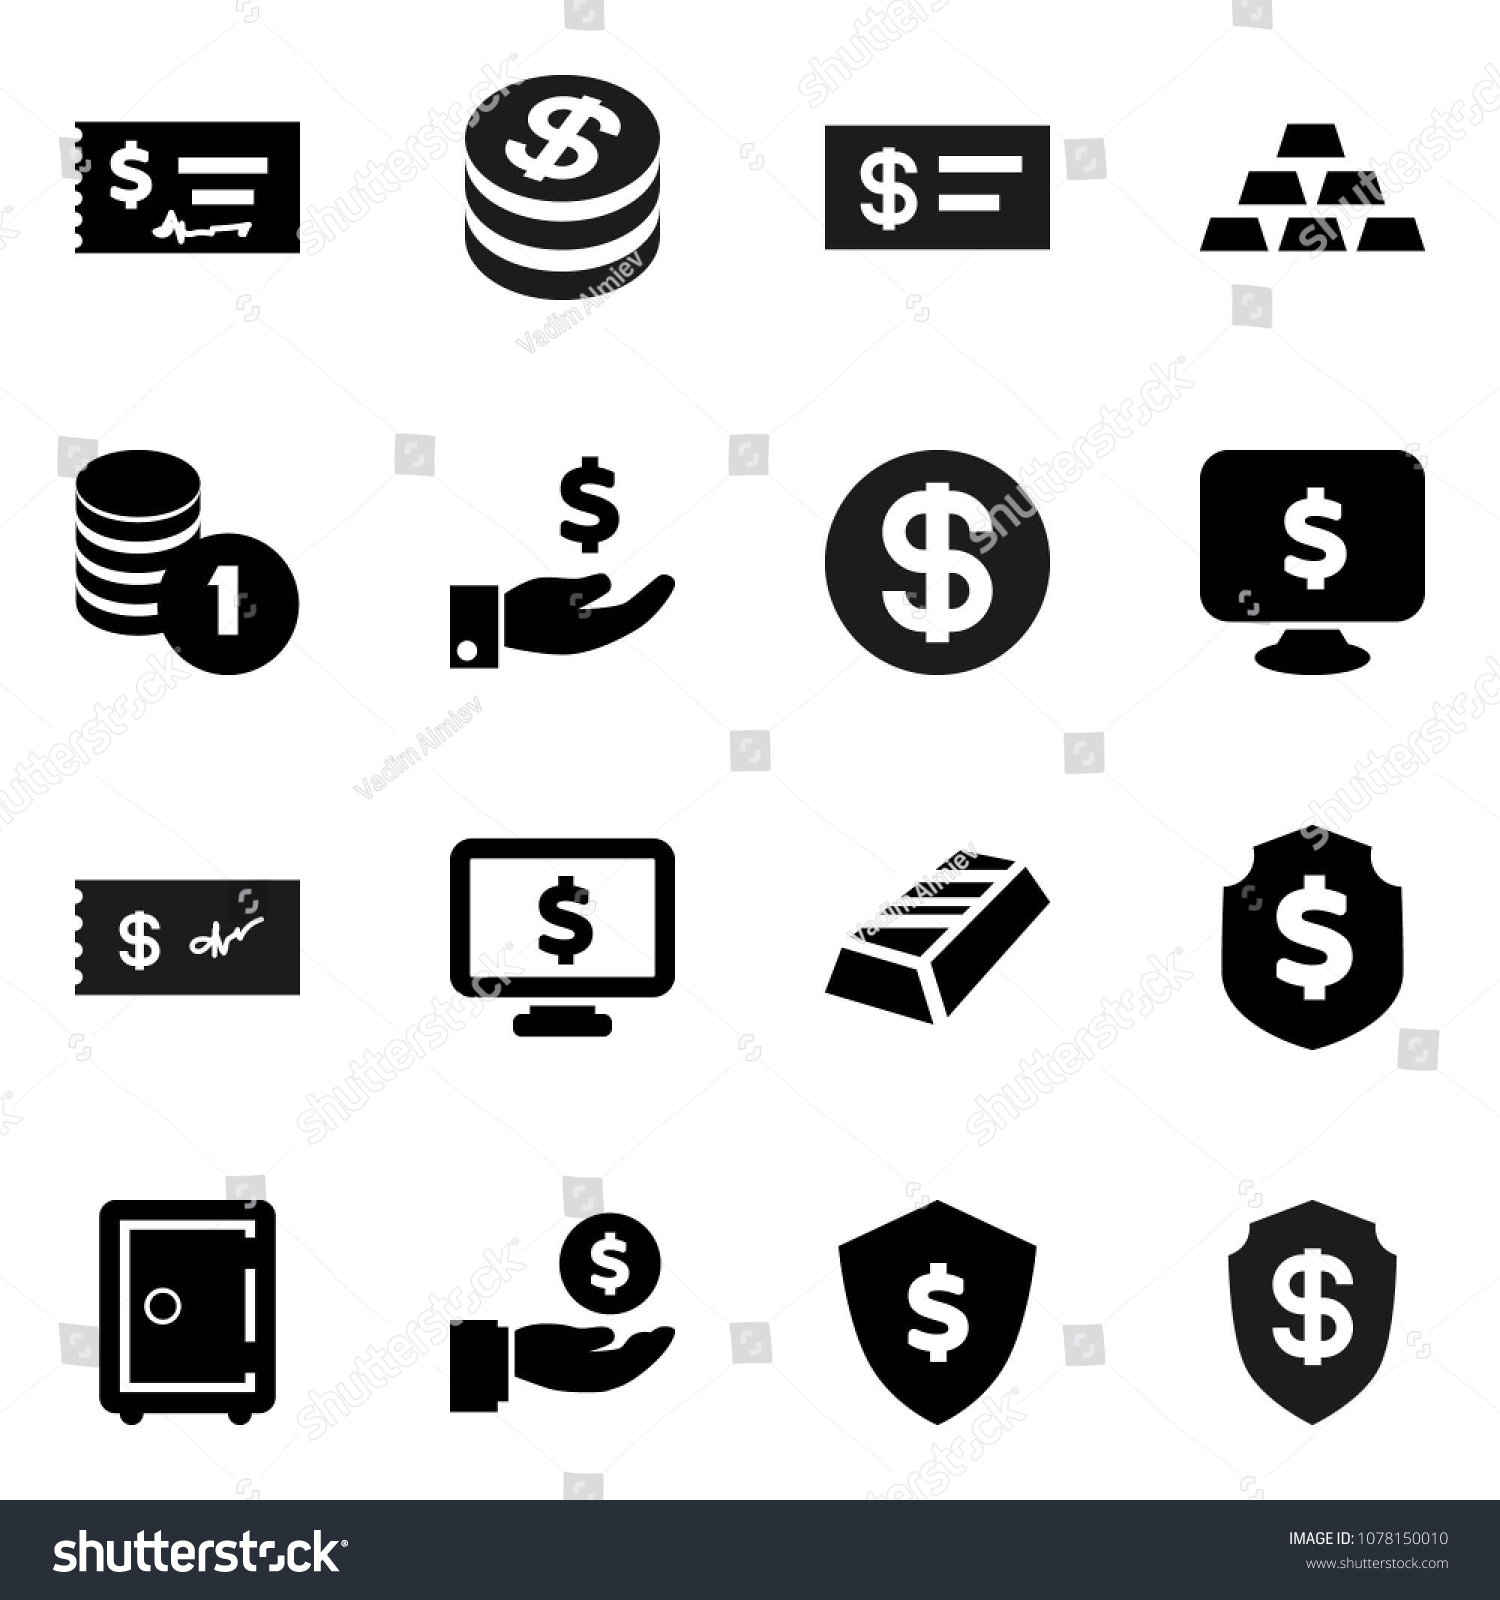 Flat vector icon set - gold ingot vector, investment, coin stack, check, dollar shield, safe, monitor #1078150010